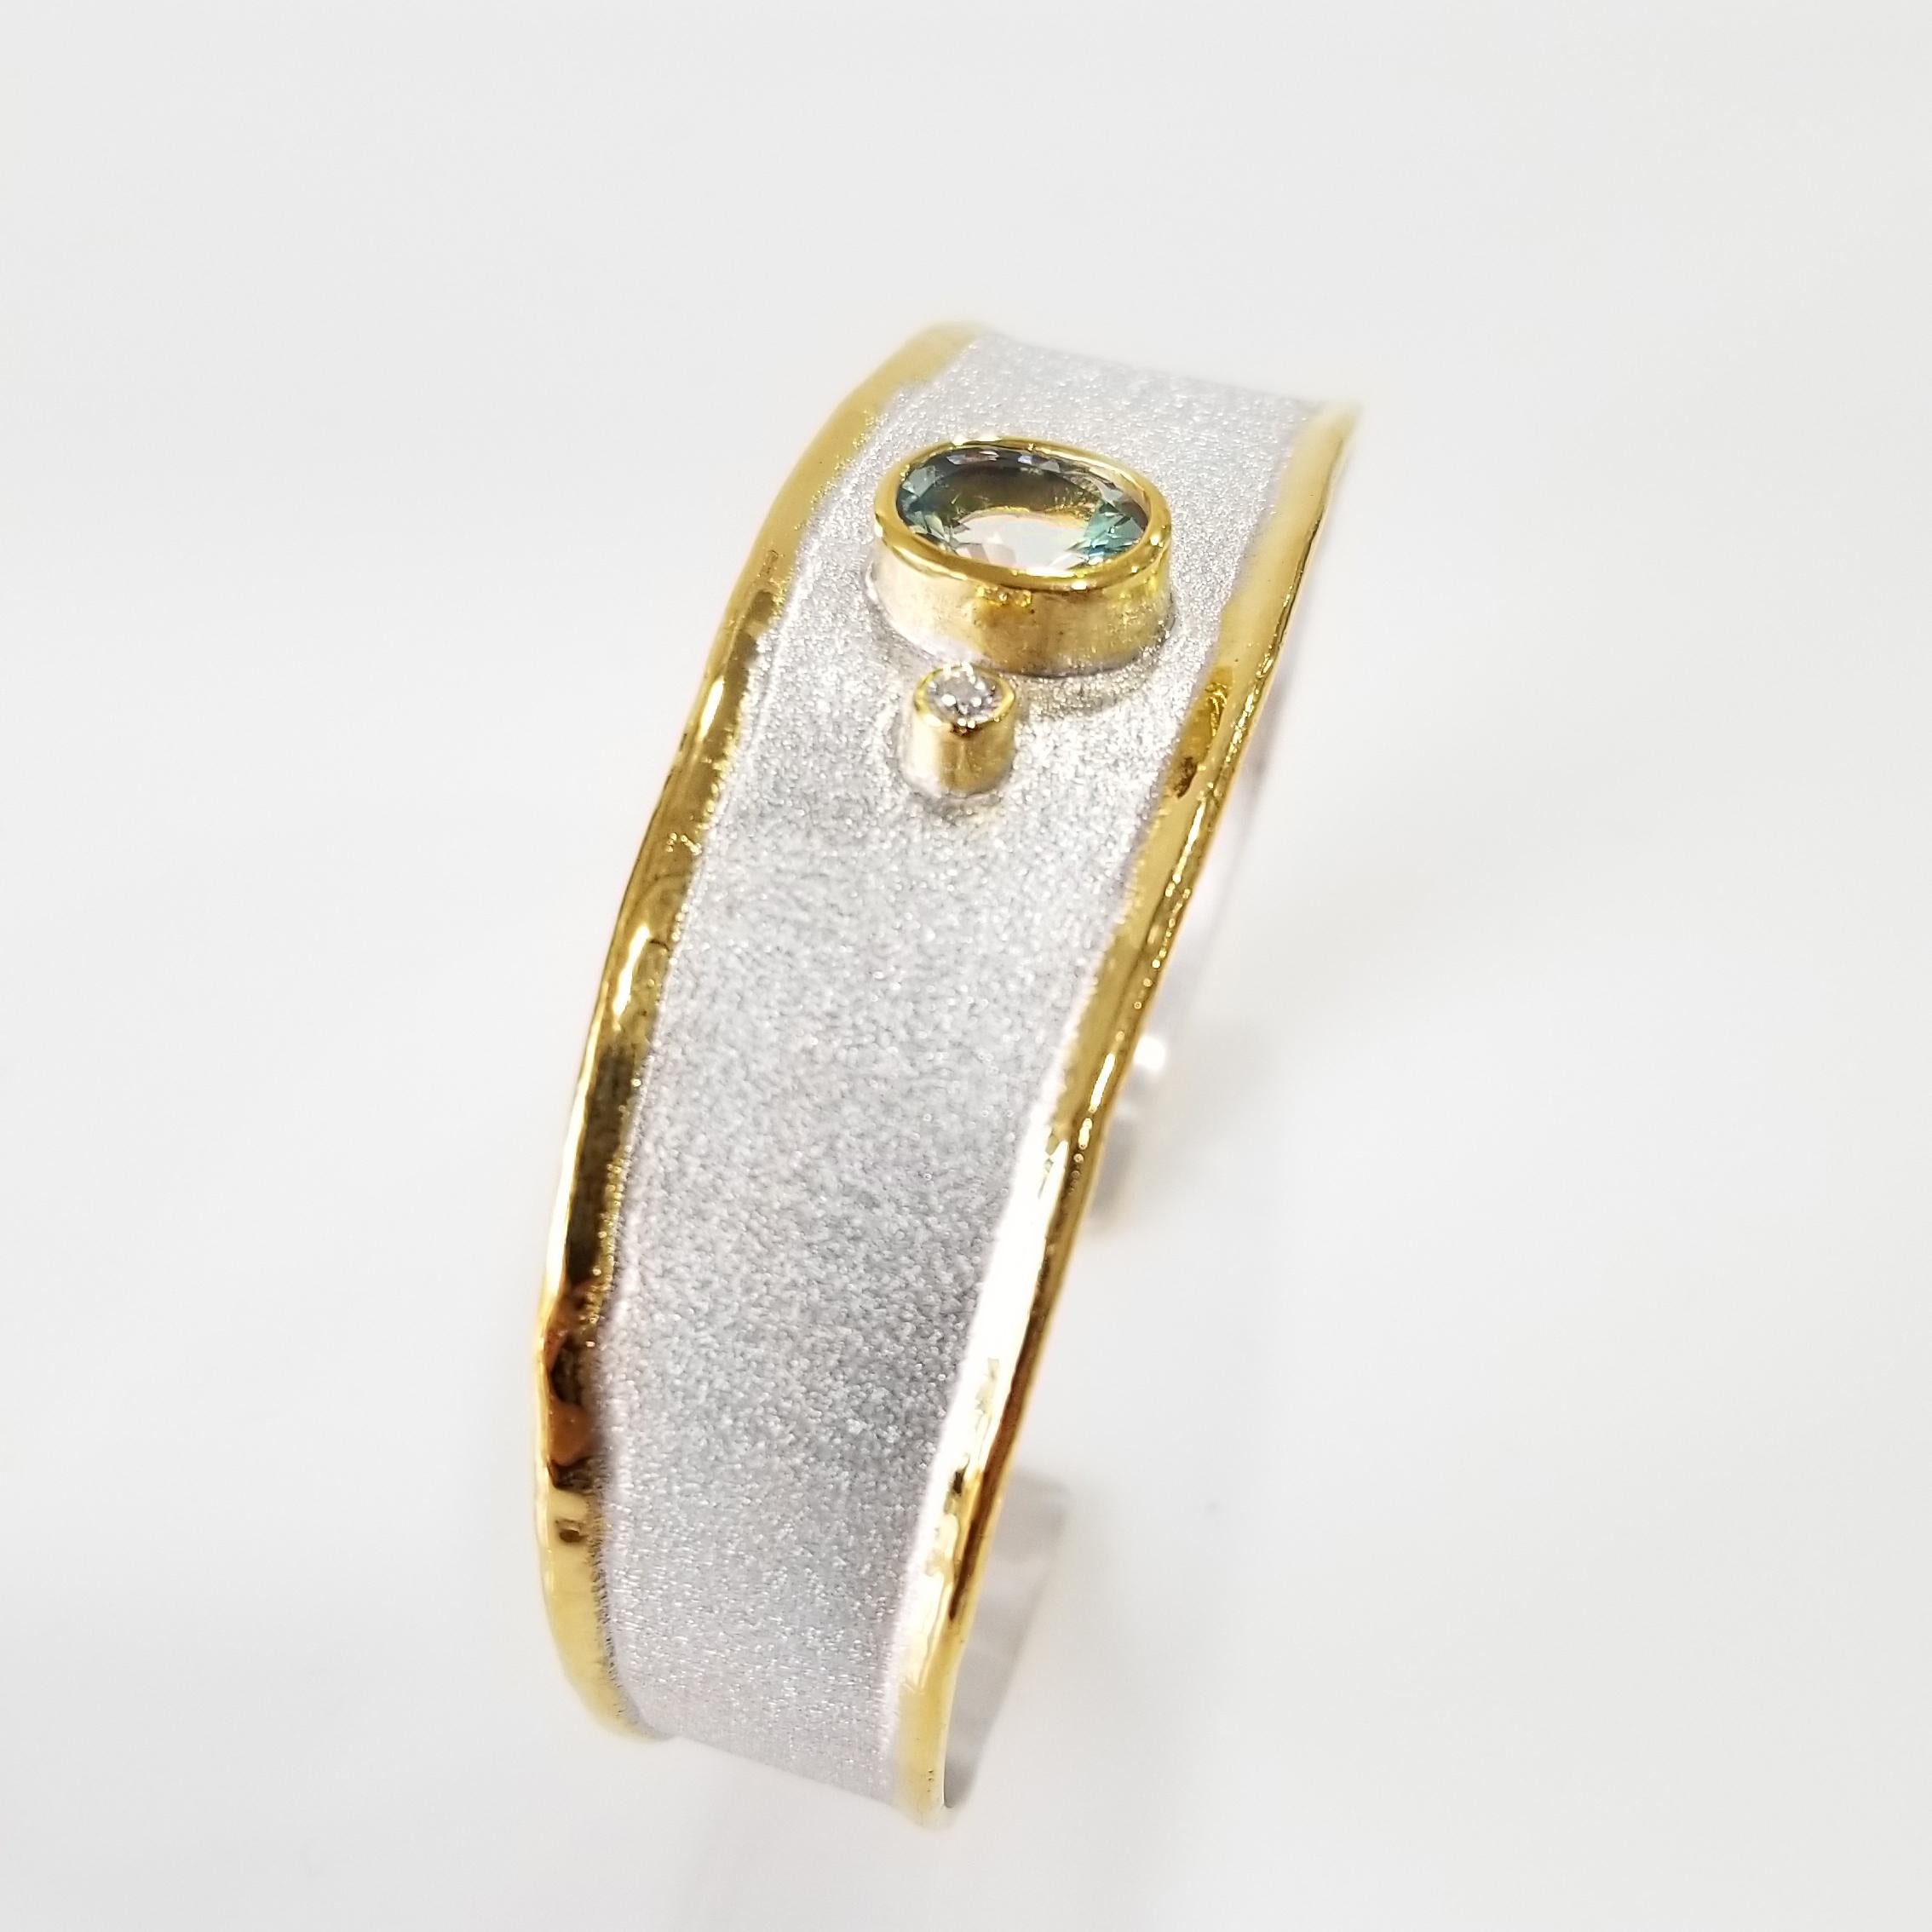 Presenting Yianni Creations cuff bracelet from Midas Collection all handcrafted from fine silver 950 purity and plated with palladium to resist the elements. This gorgeous artisan cuff bracelet features a 1.80 Carat oval shape natural Aquamarine